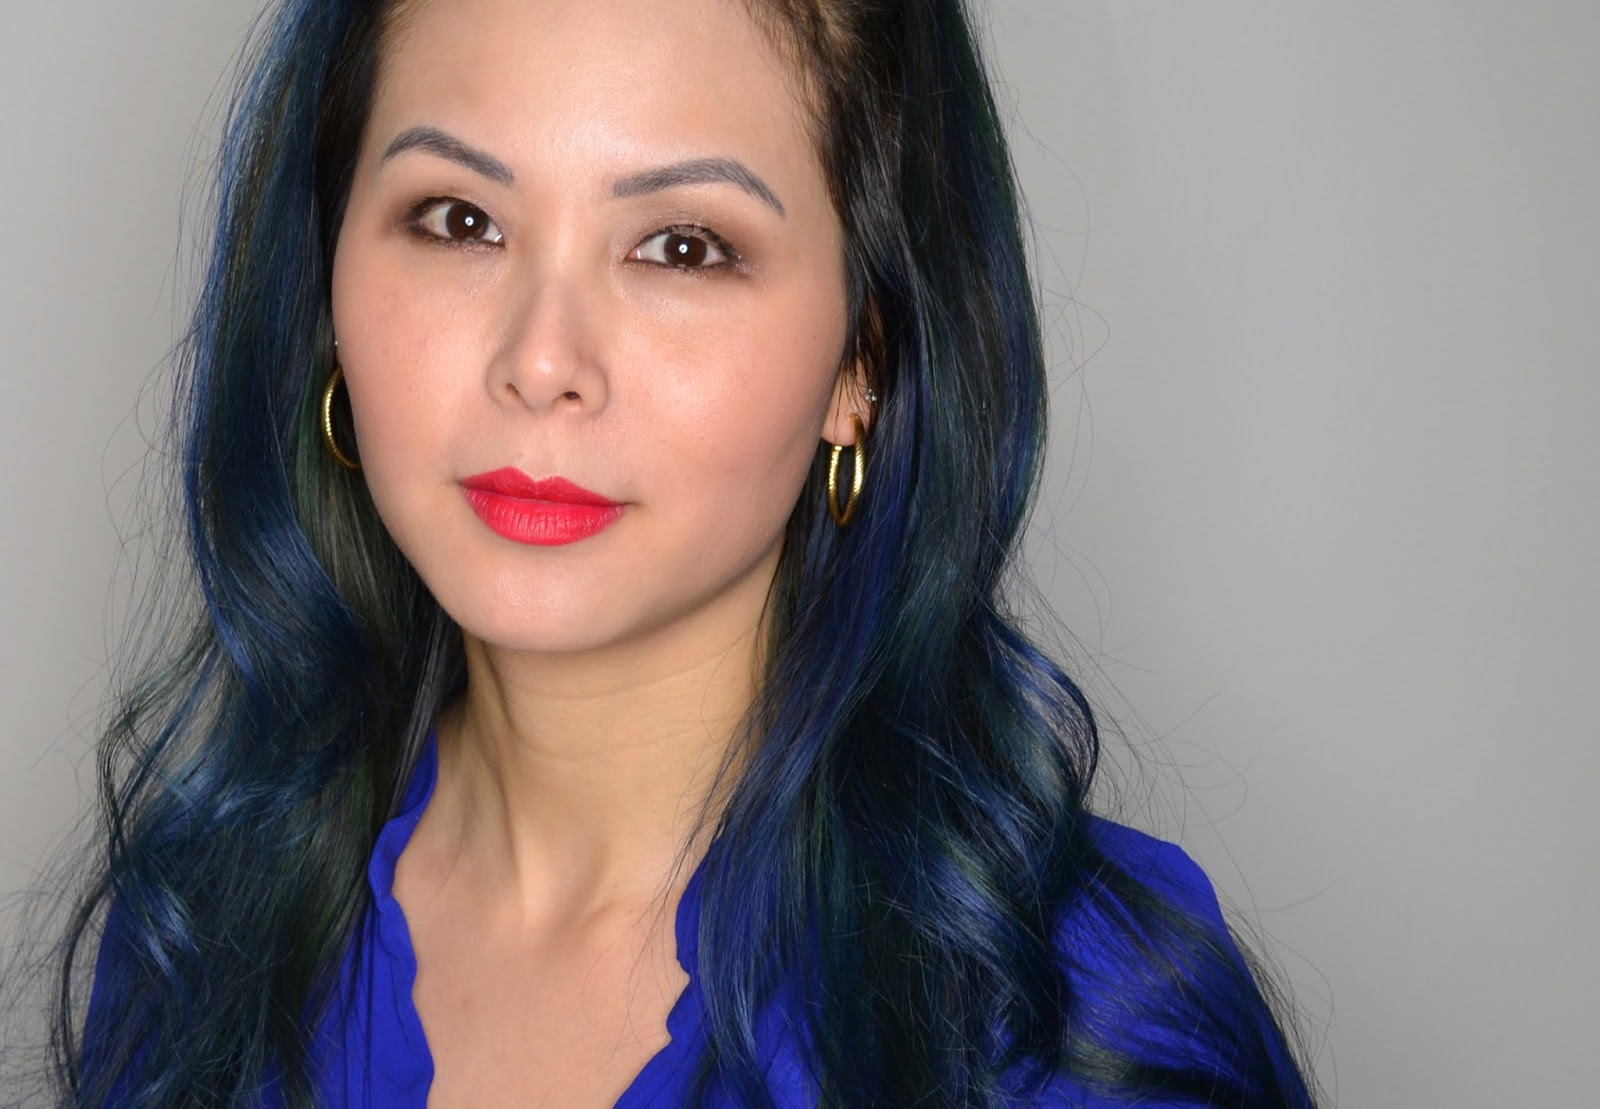 Blue hair and blue nails: 10 ways to accessorize the look - wide 2